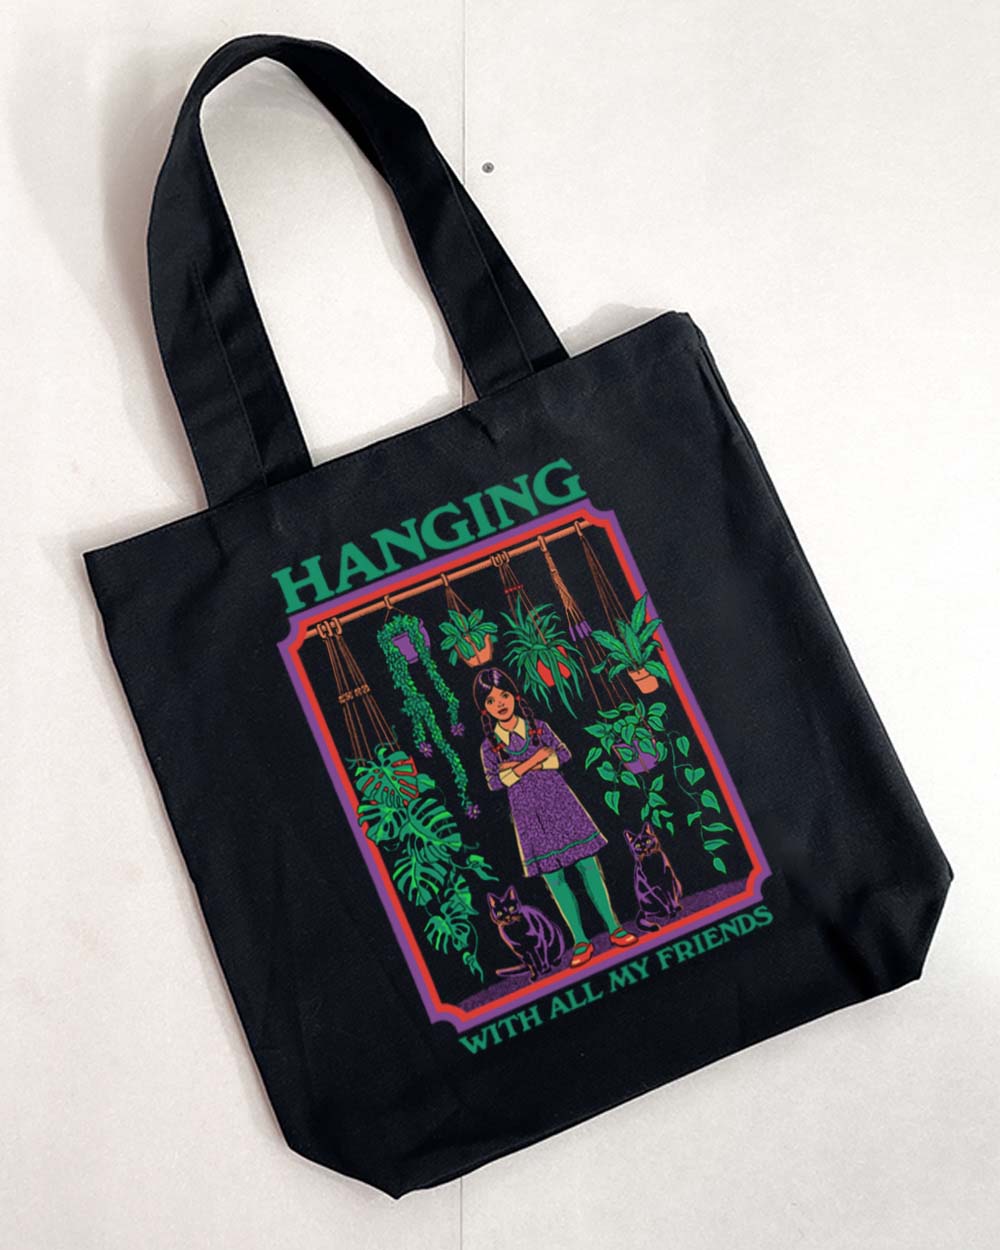 Hanging With All My Friends Tote Bag Australia Online Black